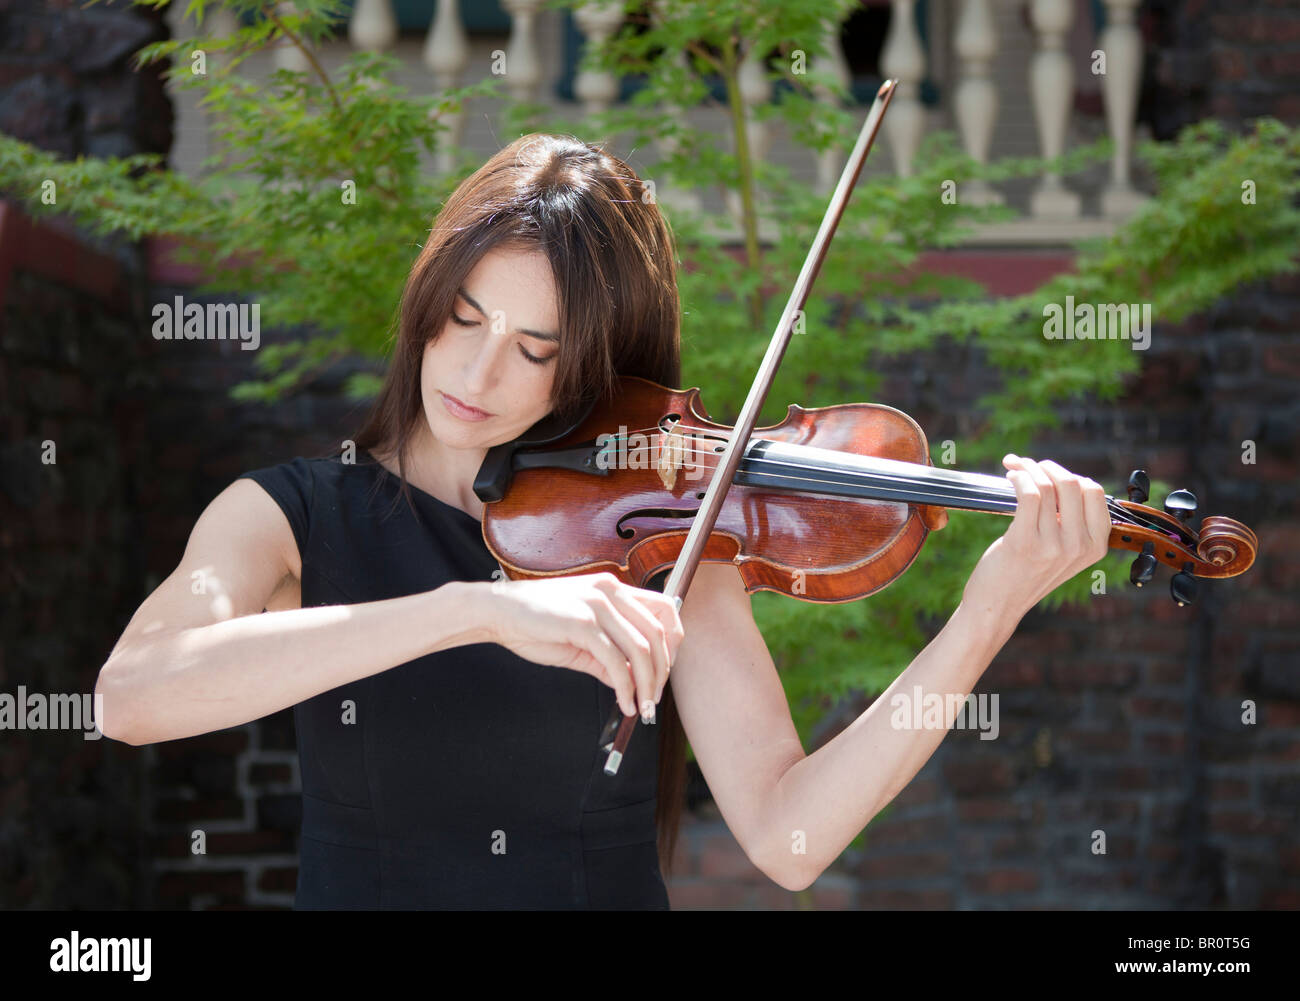 A female violinist playing outdoors, outside a building Stock Photo